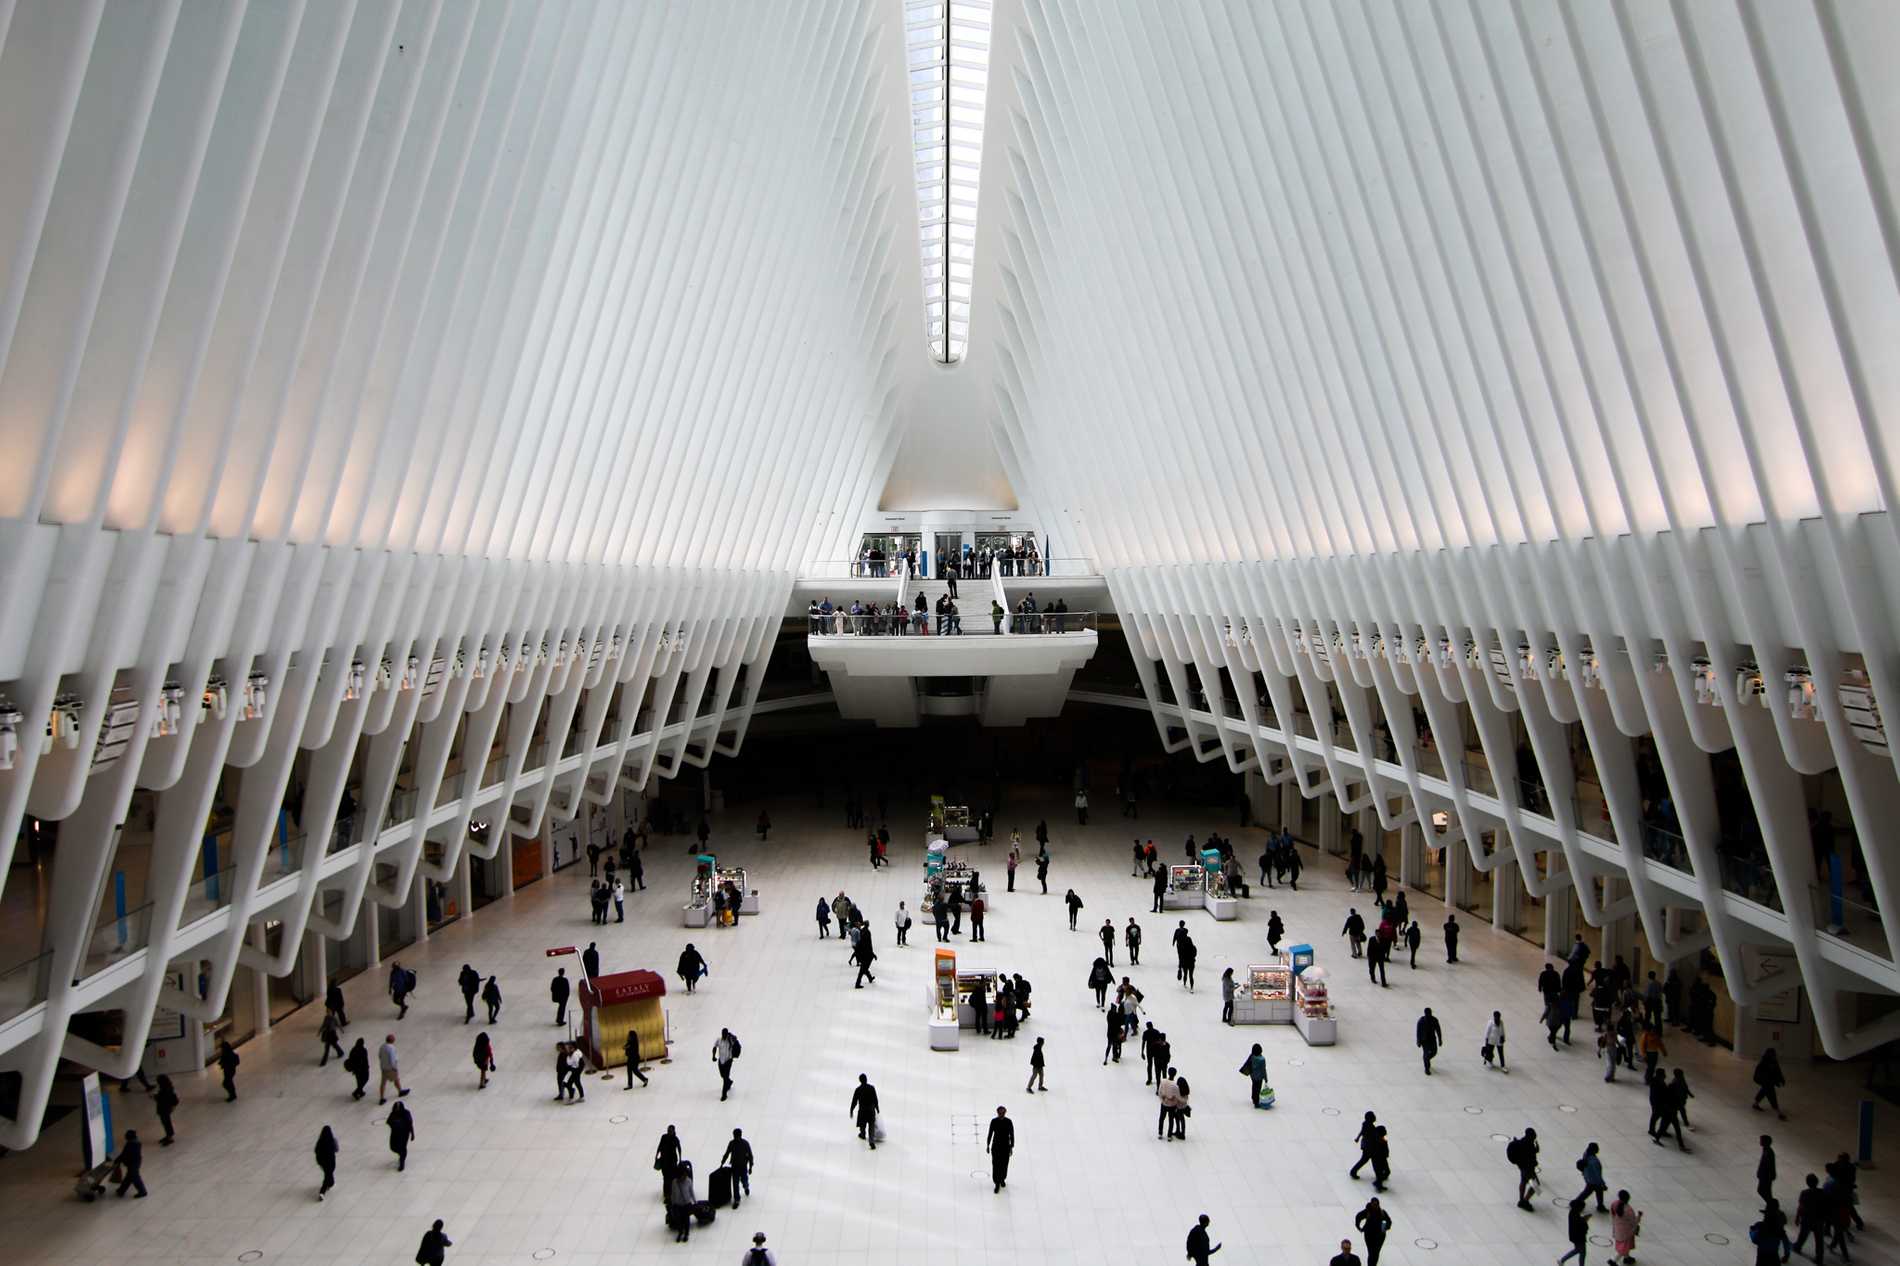 Oculus - World Trade Center Hub, NYC, USA:  A train station like no other! Completed in 2016 at a cost of $4bn, this structure sits on the site of the 9/11 attacks and is designed to resemble a bird flying from the hands of a child. Head to one of the mezzanine floors to take it all in.